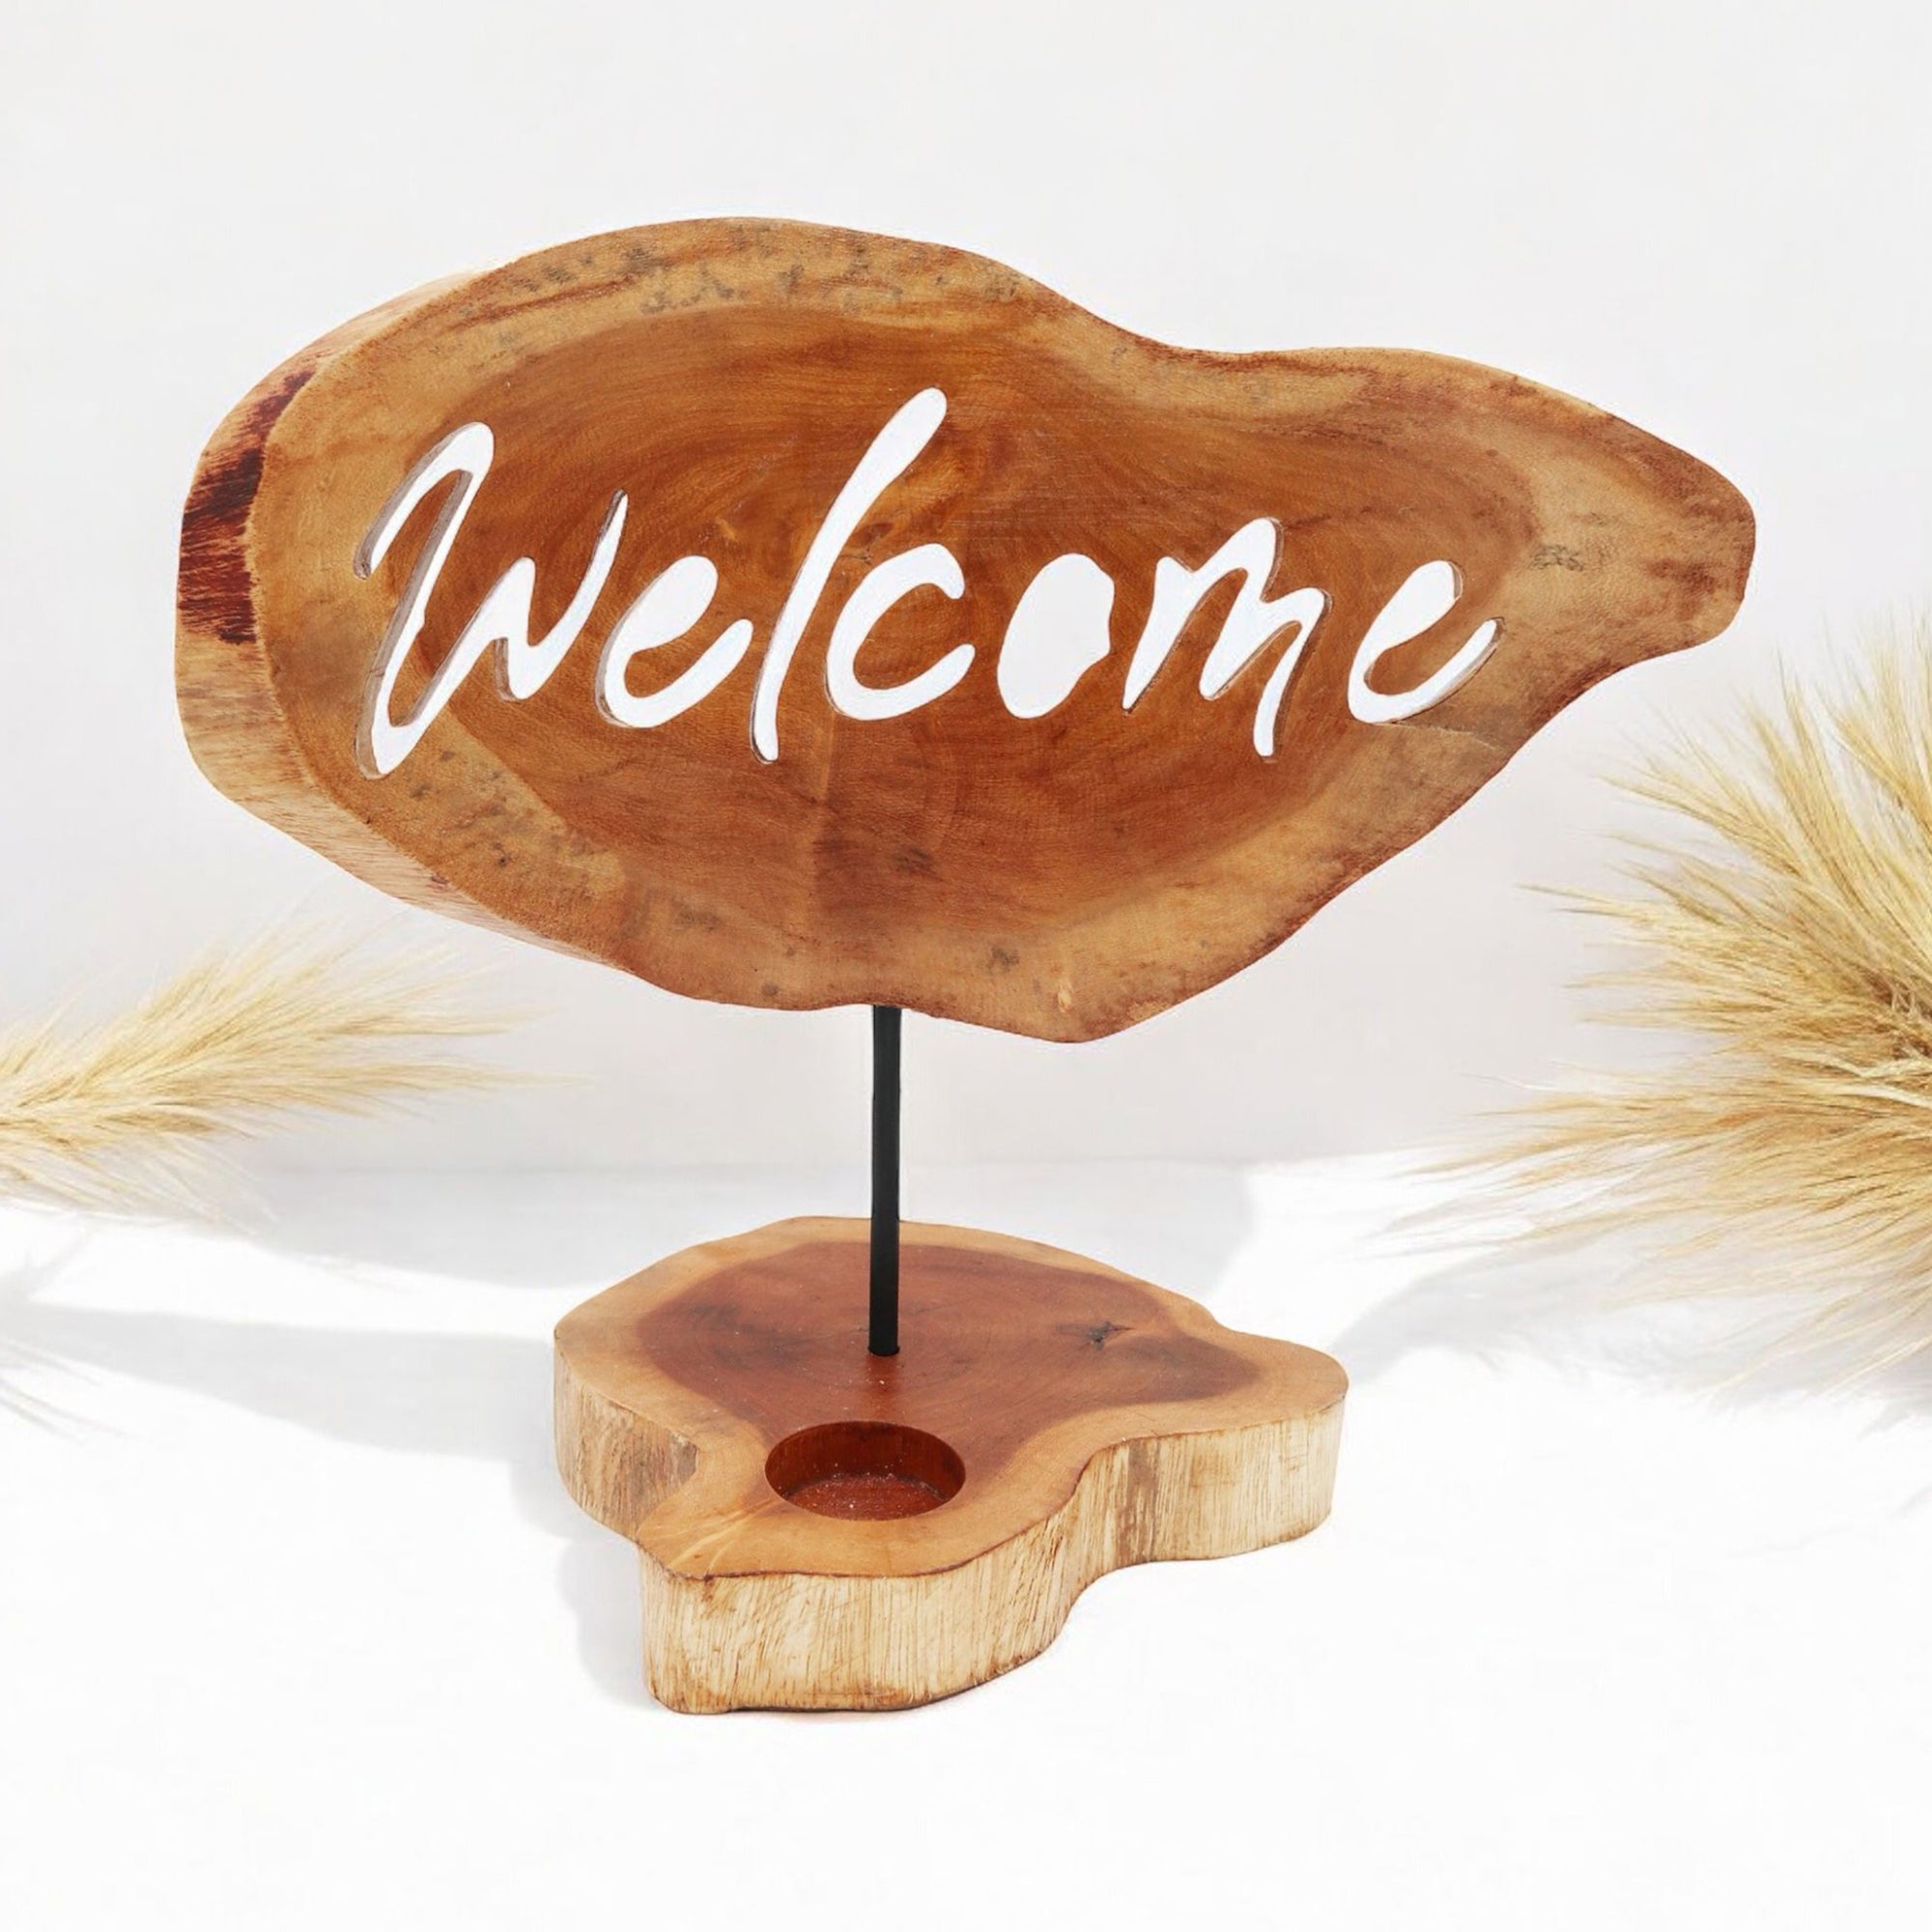 Welcome Tealight Holder - Welcome Home Candle Holder - Rustic Home Decor